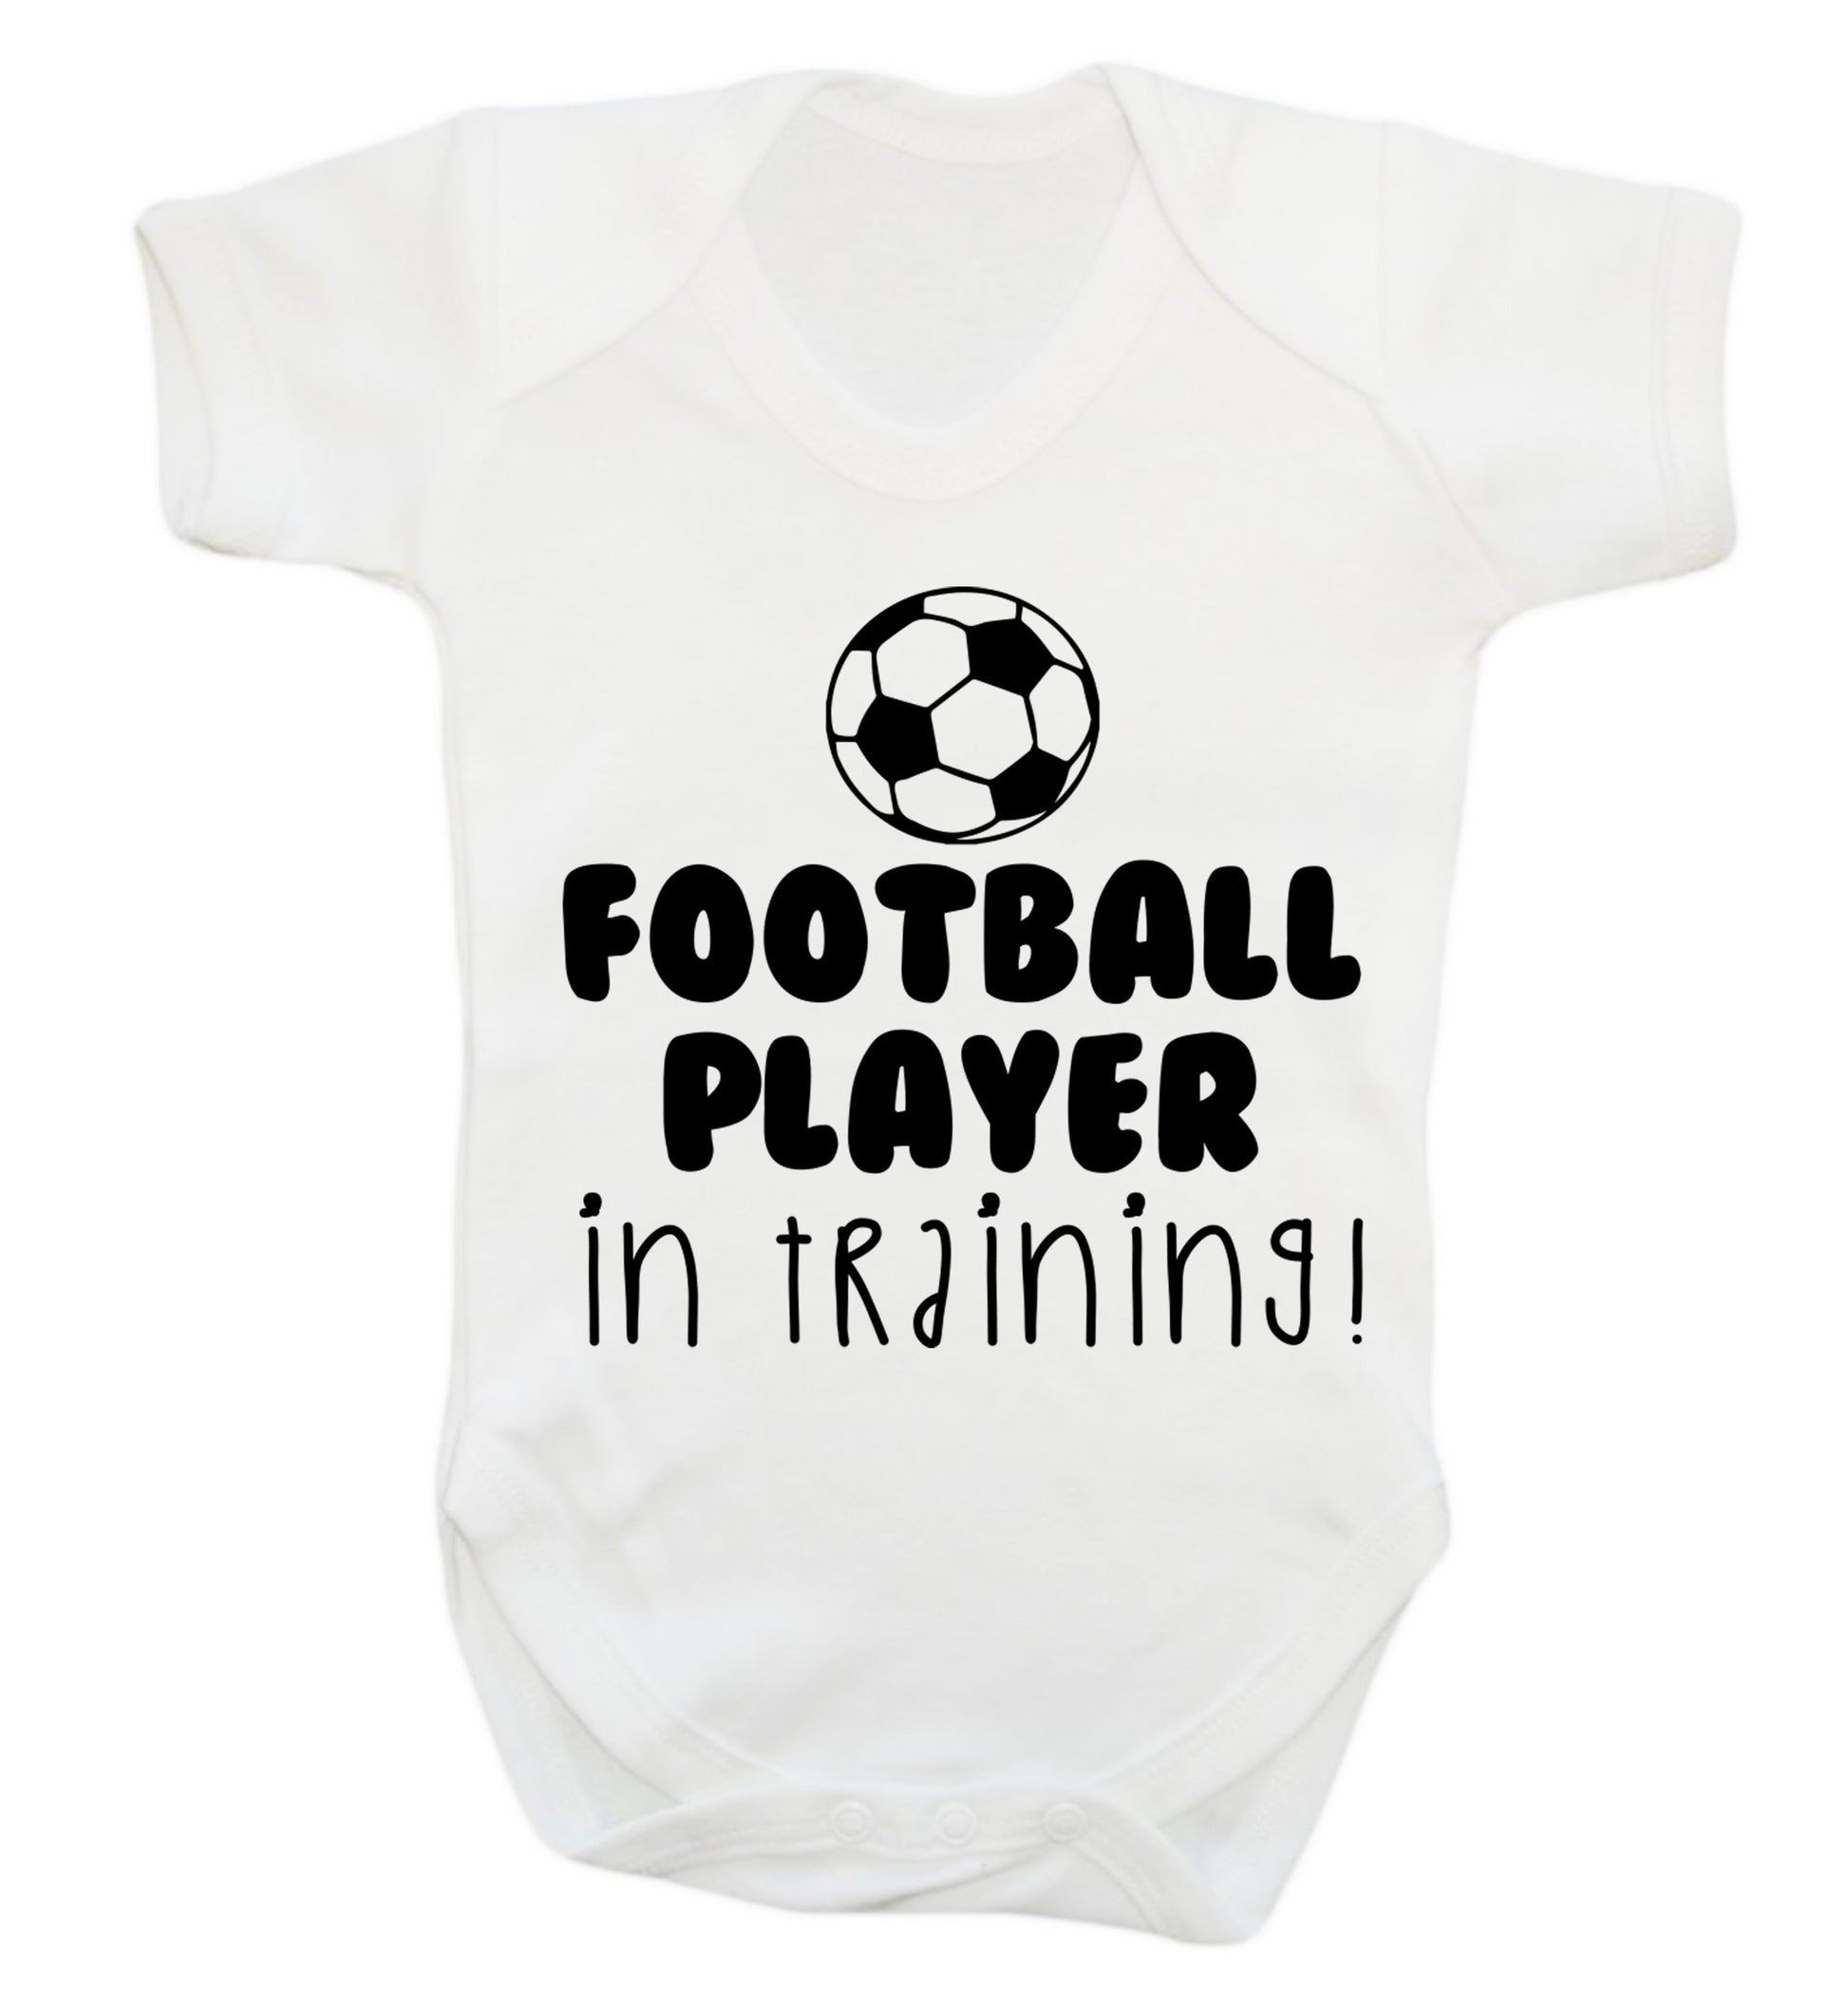 Football player in training Baby Vest white 18-24 months